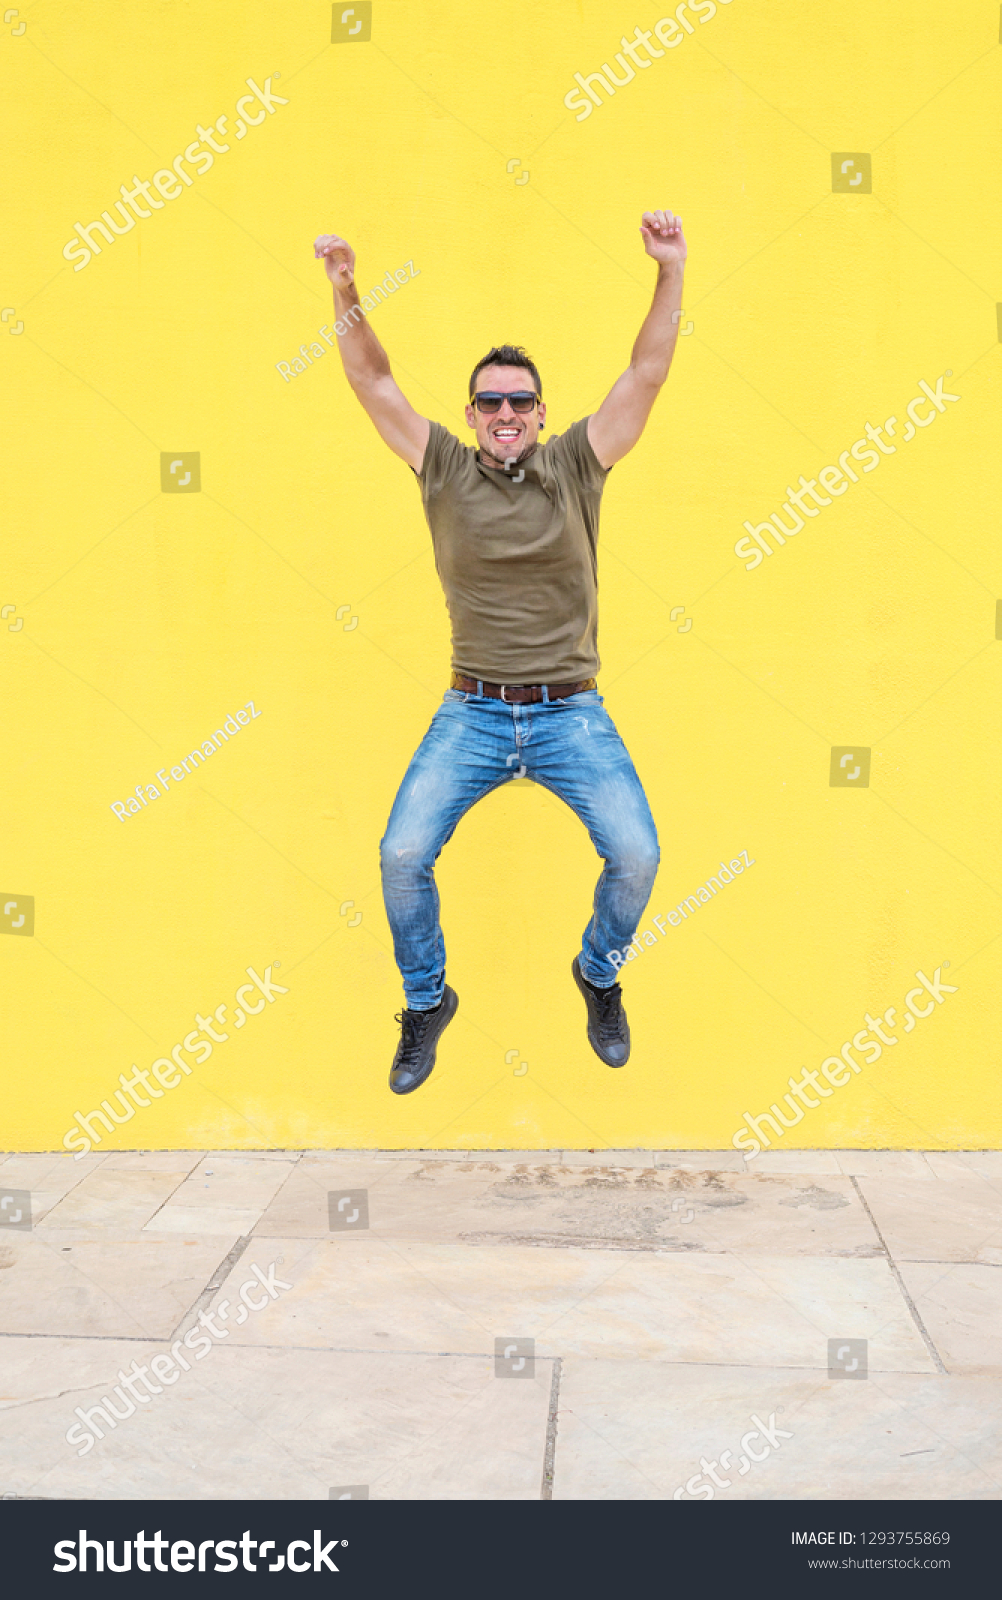 Front view of a young happy man wearing sunglasses jumping against a yellow bright wall in a sunny day #1293755869